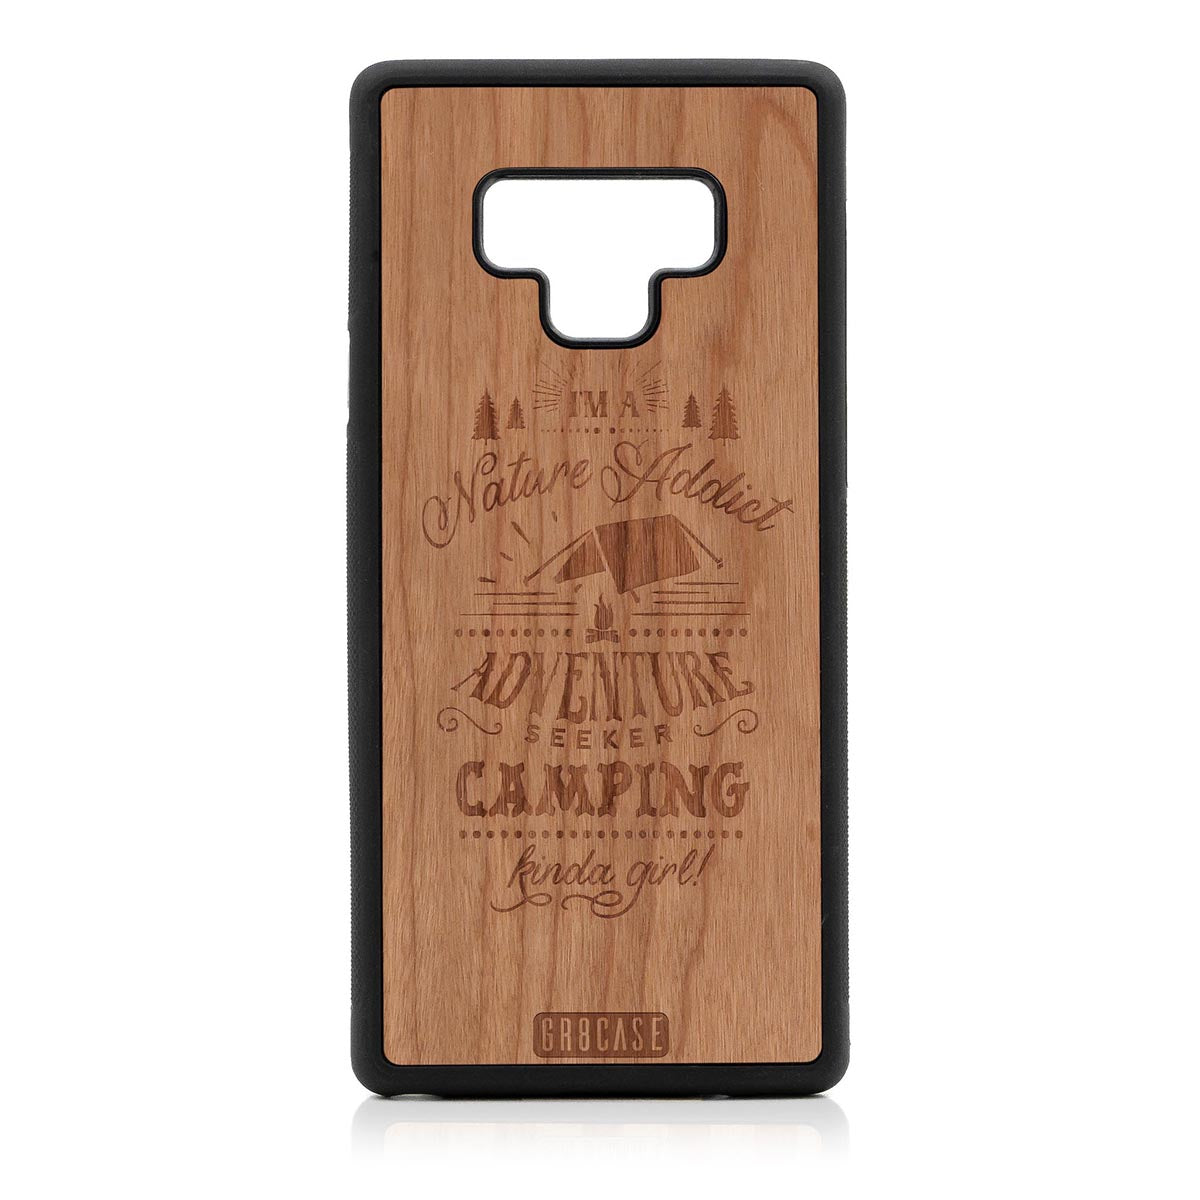 I'm A Nature Addict Adventure Seeker Camping Kinda Girl Design Wood Case Samsung Galaxy Note 9 by GR8CASE